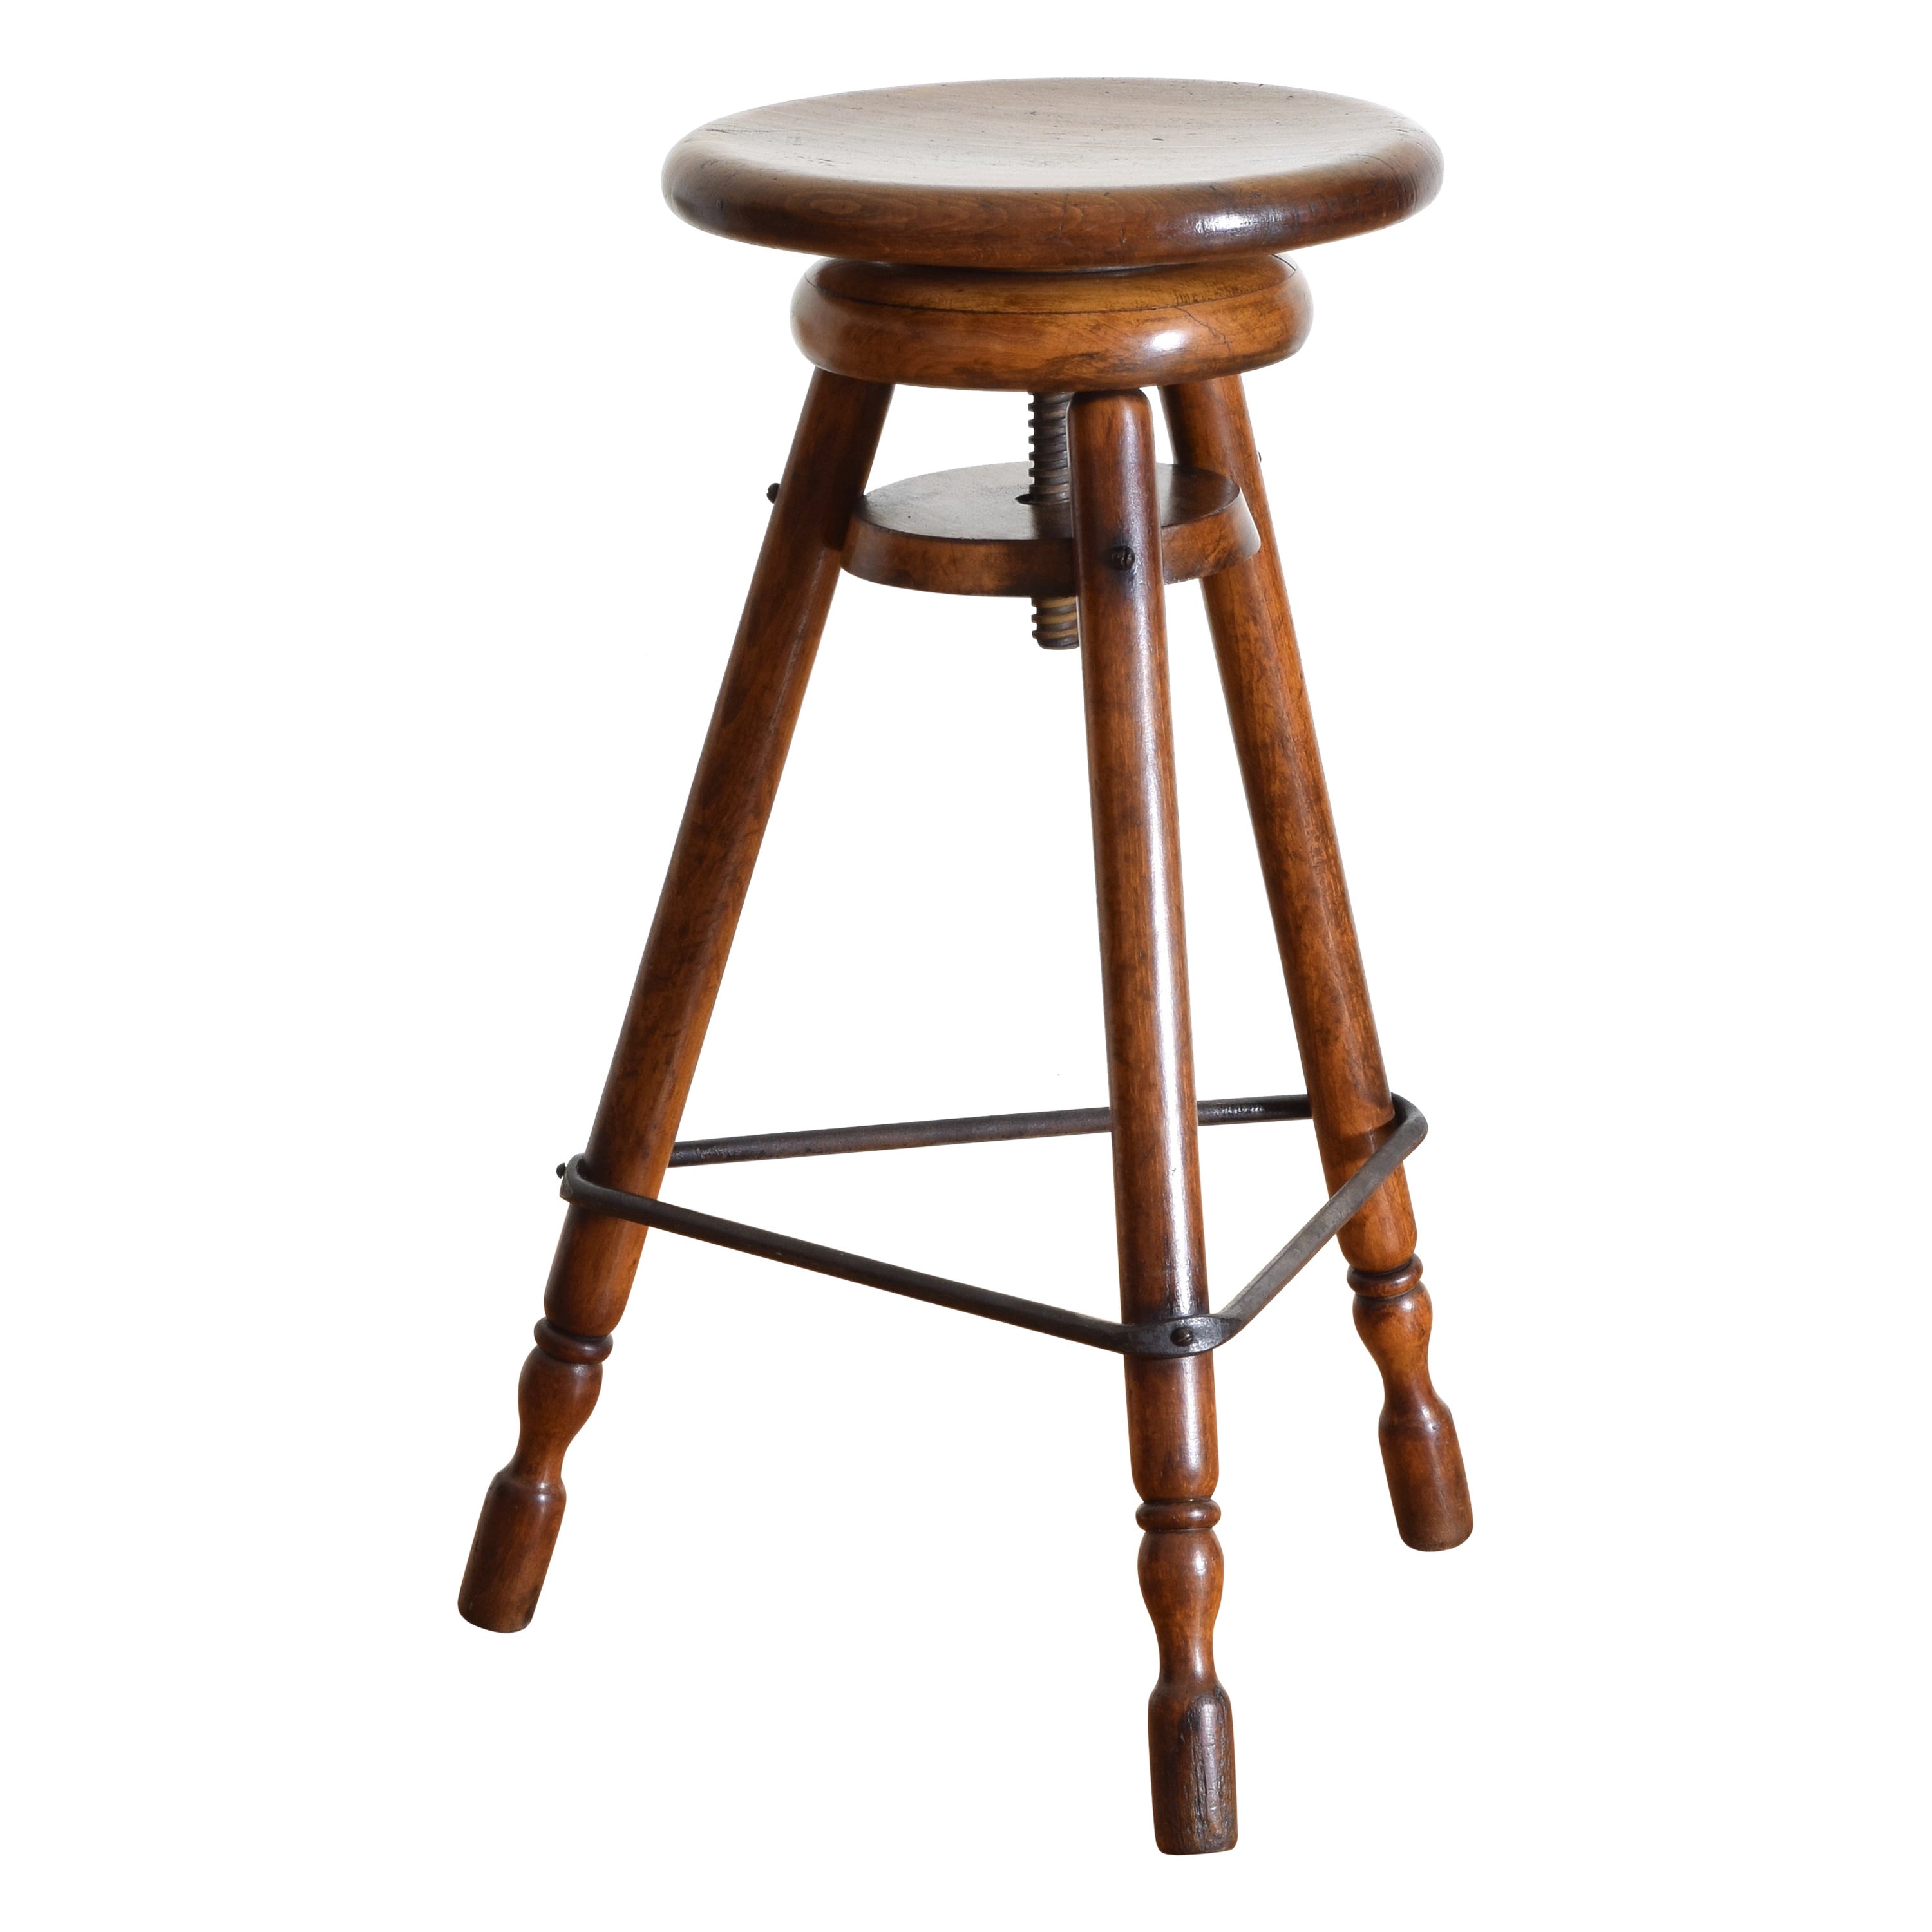 French Turned Walnut and Iron Adjustable Artist’s Stool, circa 1900